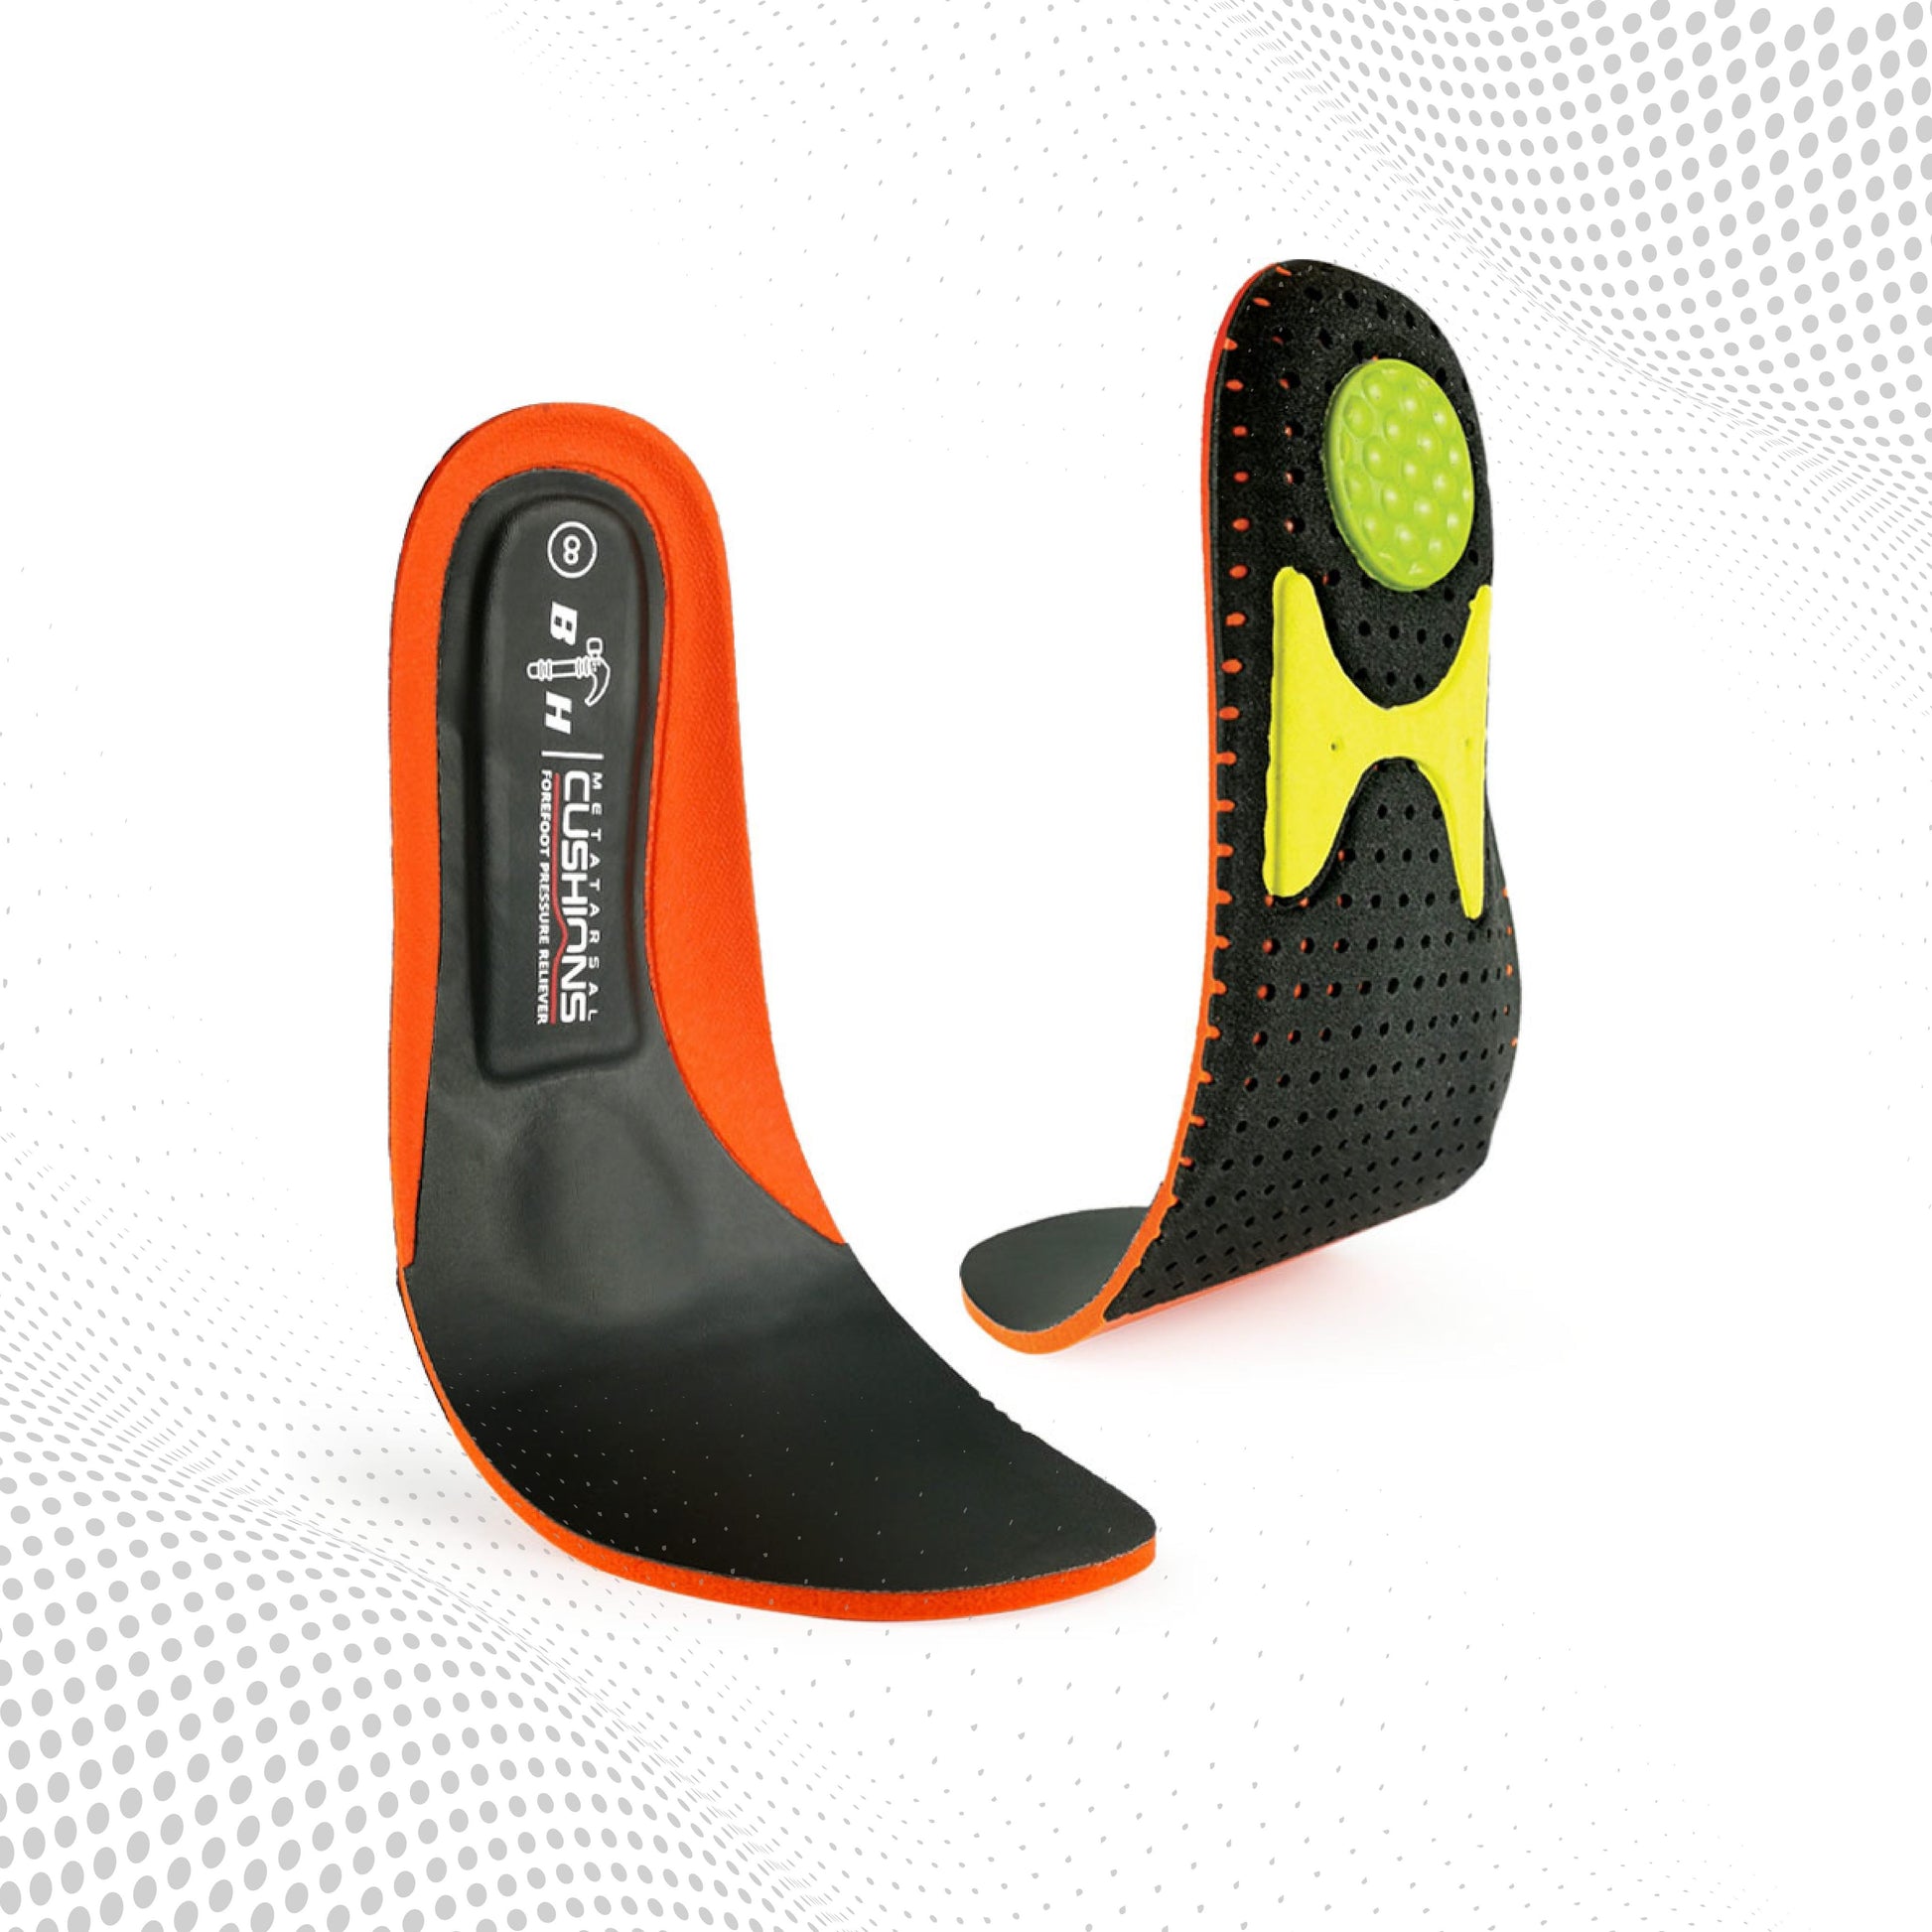 "Experience ultimate comfort with Black Hammer Pro Series Metatarsal Cushions Insole WF6242. Made of PU, featuring additional cushioning for superior comfort, U-shaped heels, and a blend of PU foam, HI-POLY foam, Osole foam, and silicone gel. Unisex design fits all shoe sizes, reduces stress, and ensures year-round comfort."